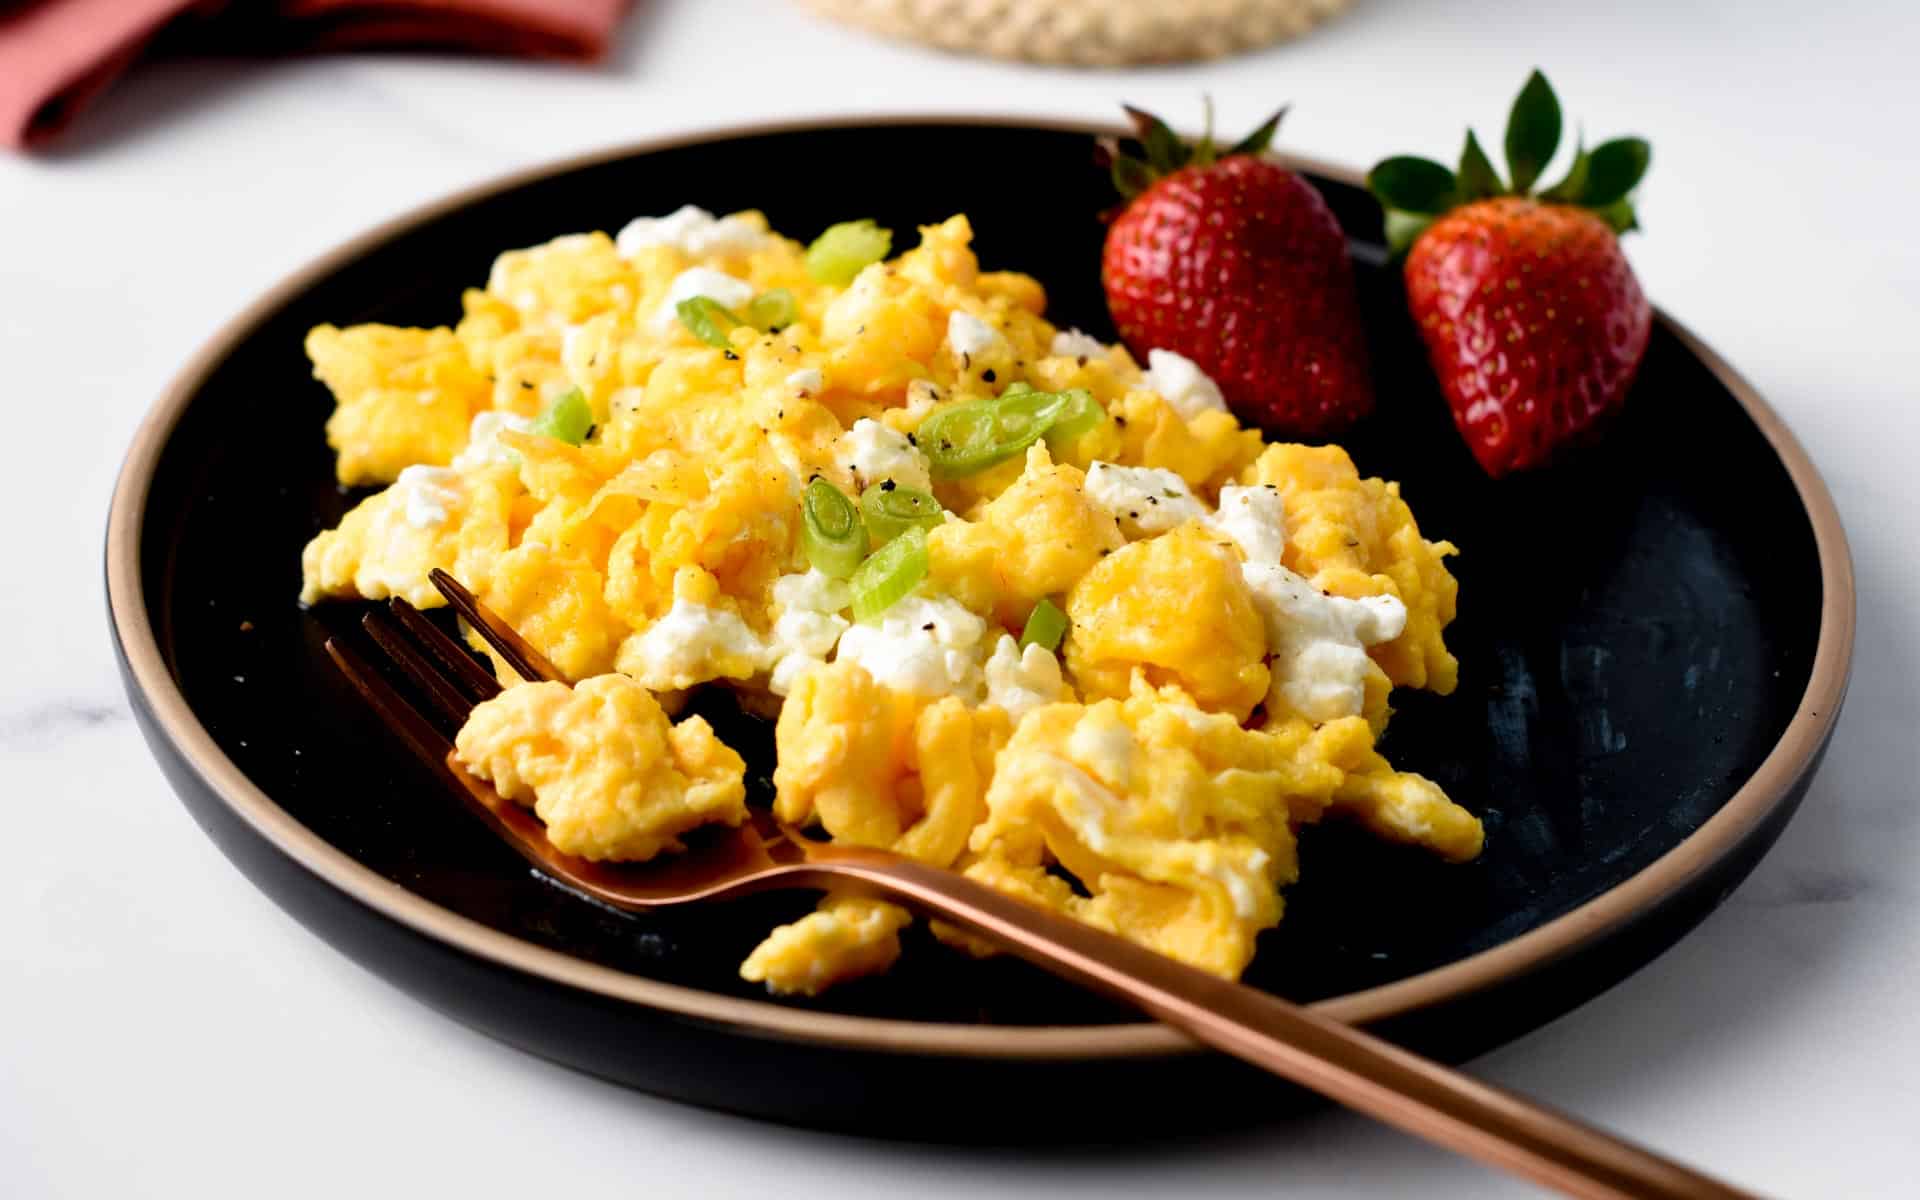 https://www.sweetashoney.co/wp-content/uploads/Scrambled-Eggs-with-Cottage-Cheese.jpg